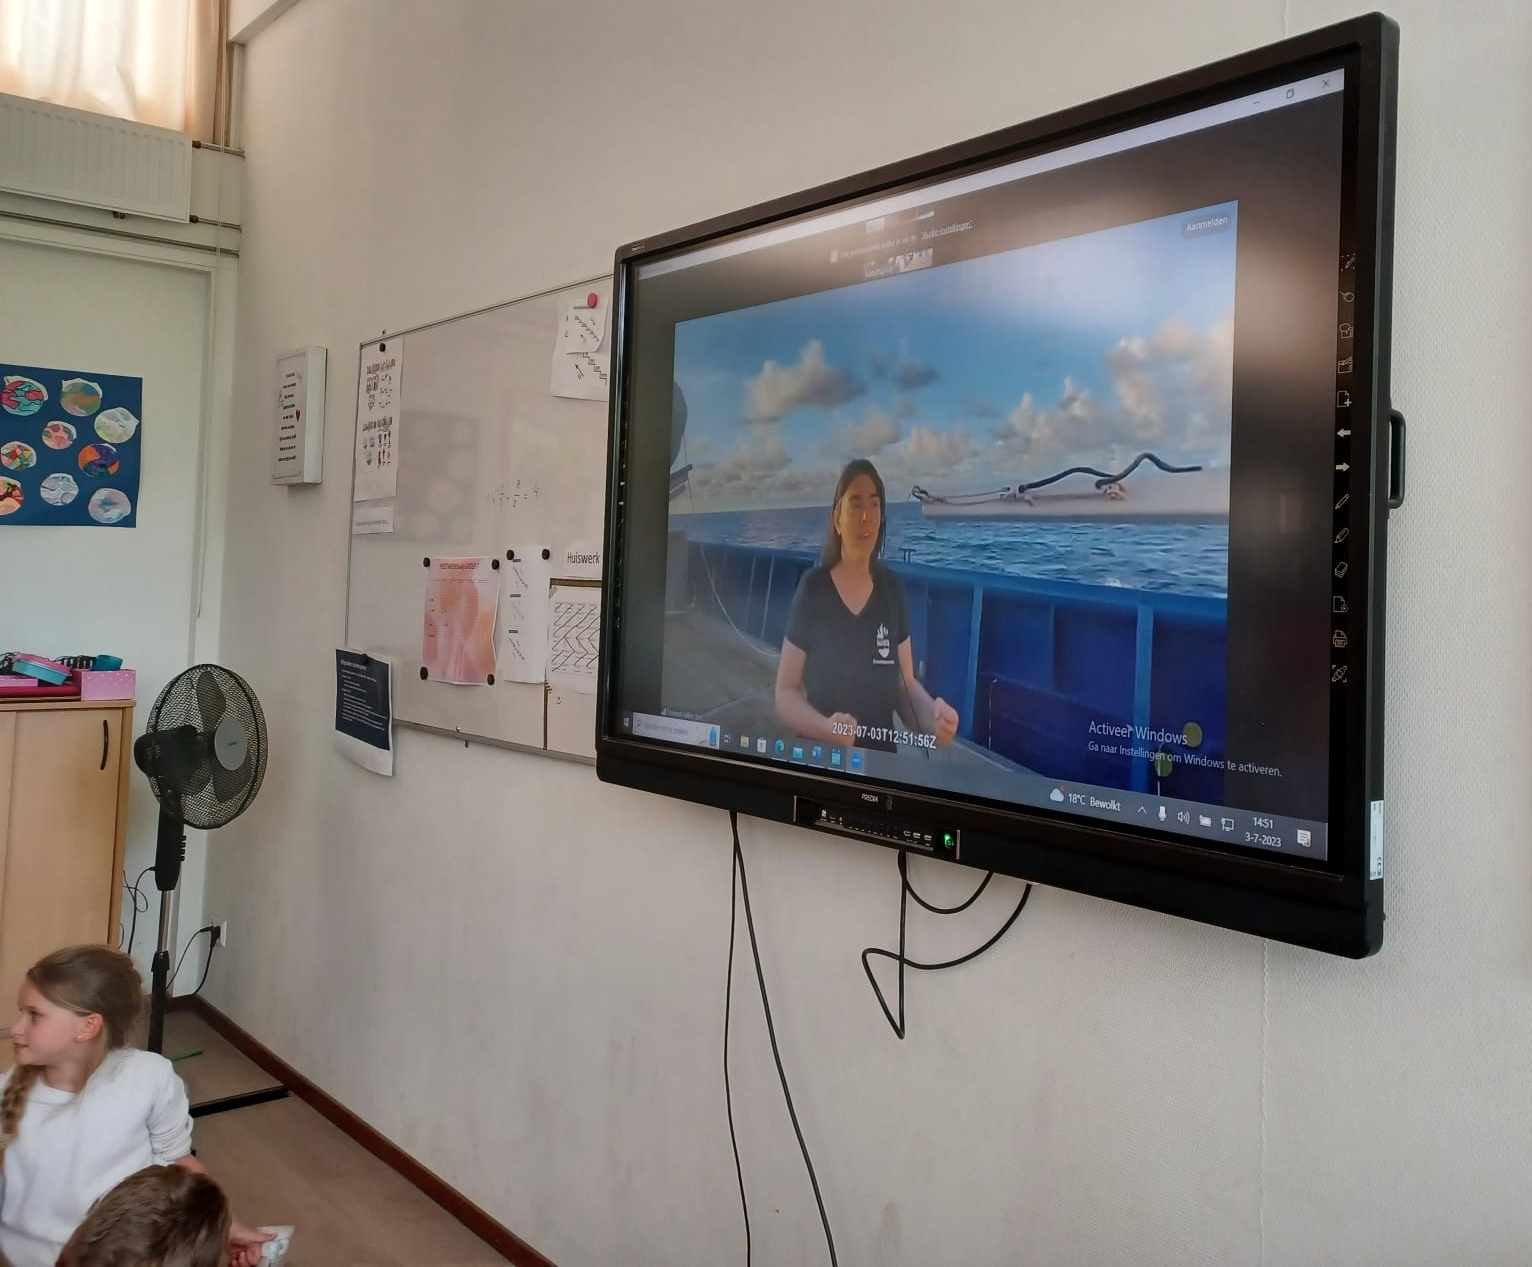 Sabine Gollner live on screen in the Barbara school, from the Falkor(too) in the Pacific Ocean.